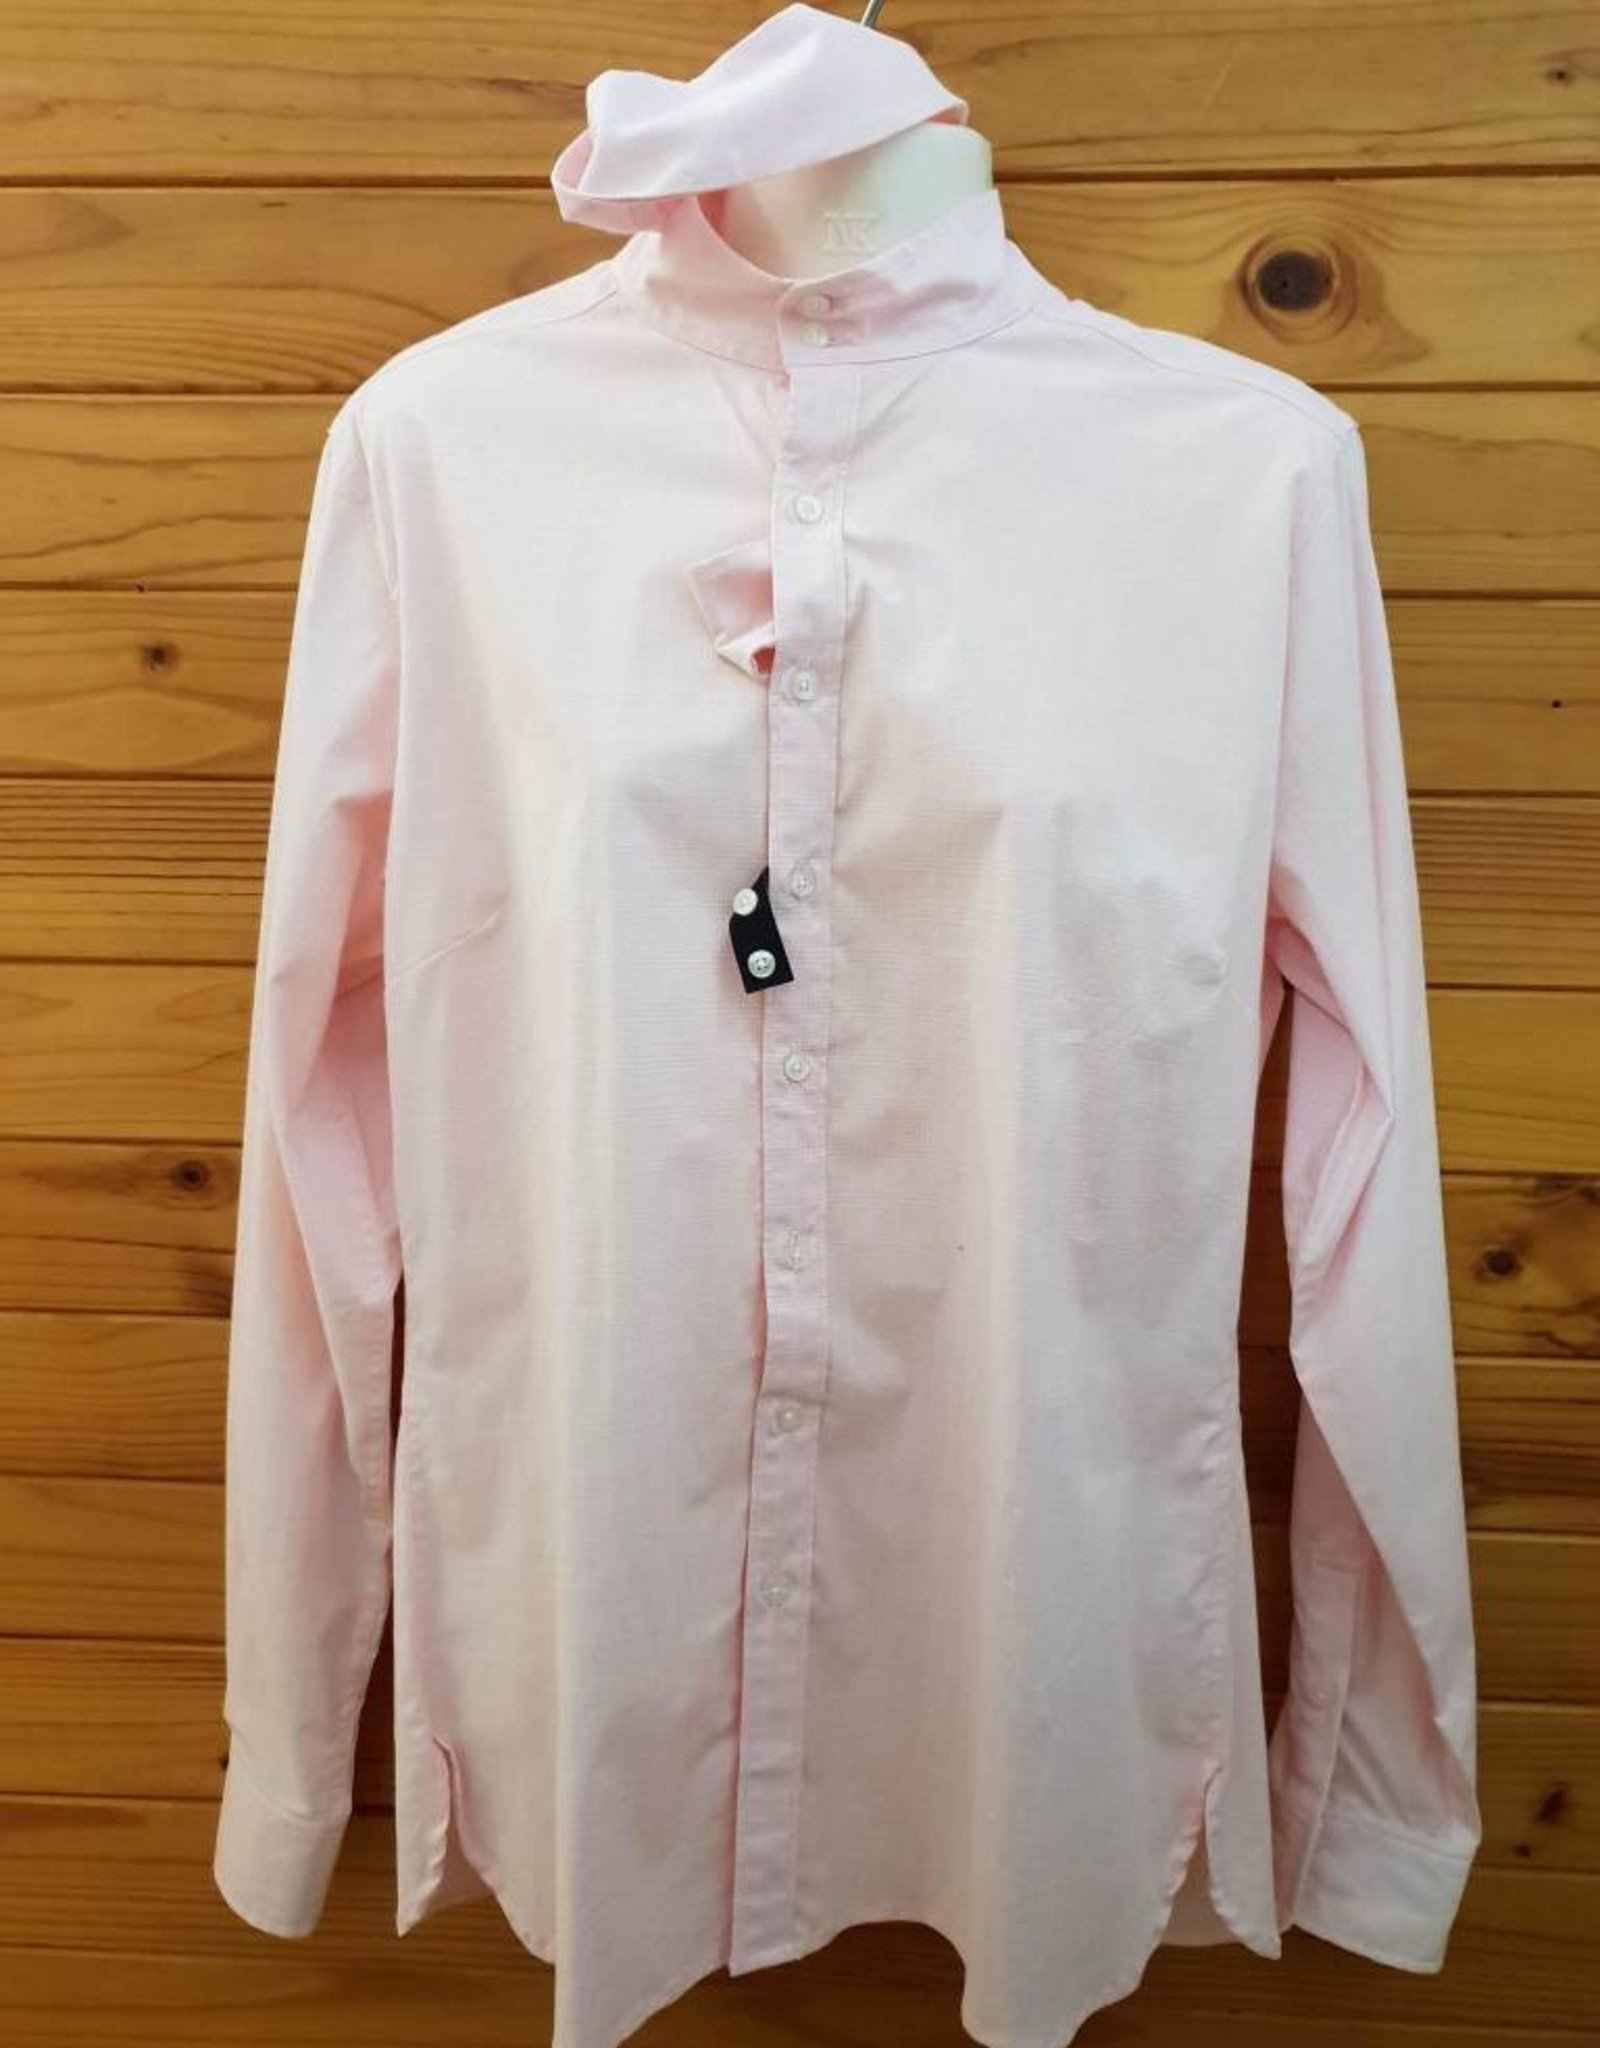 Ariat Ariat Victory Long Sleeve Shirt - Pink Plaid  - Size 42